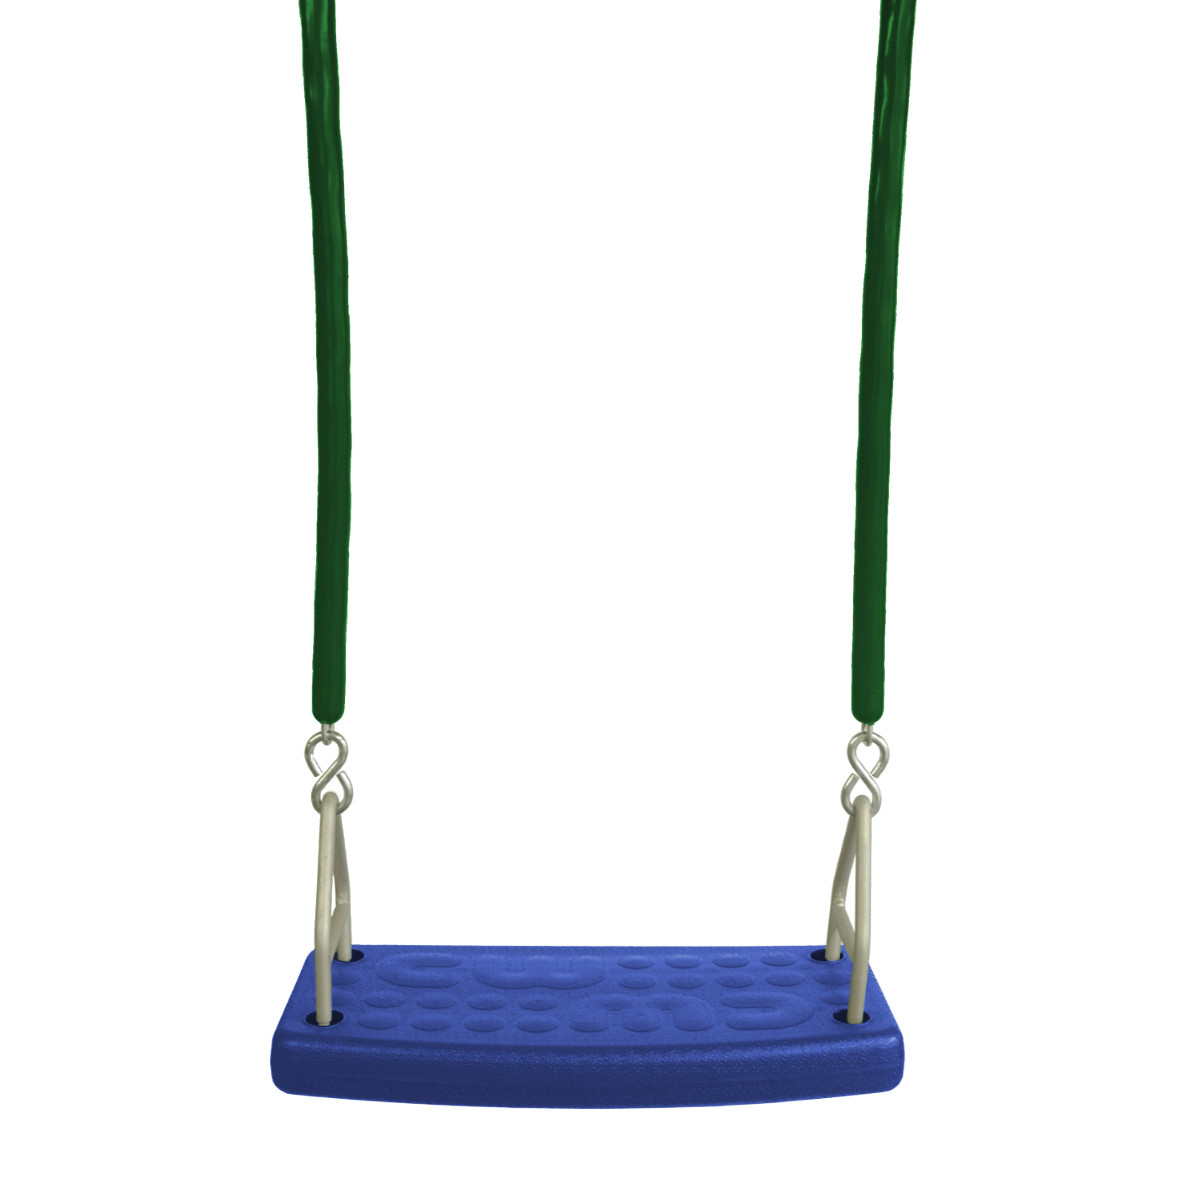 Molded Flat Swing Seat with 5'6" Soft Grip Chain (S-173)